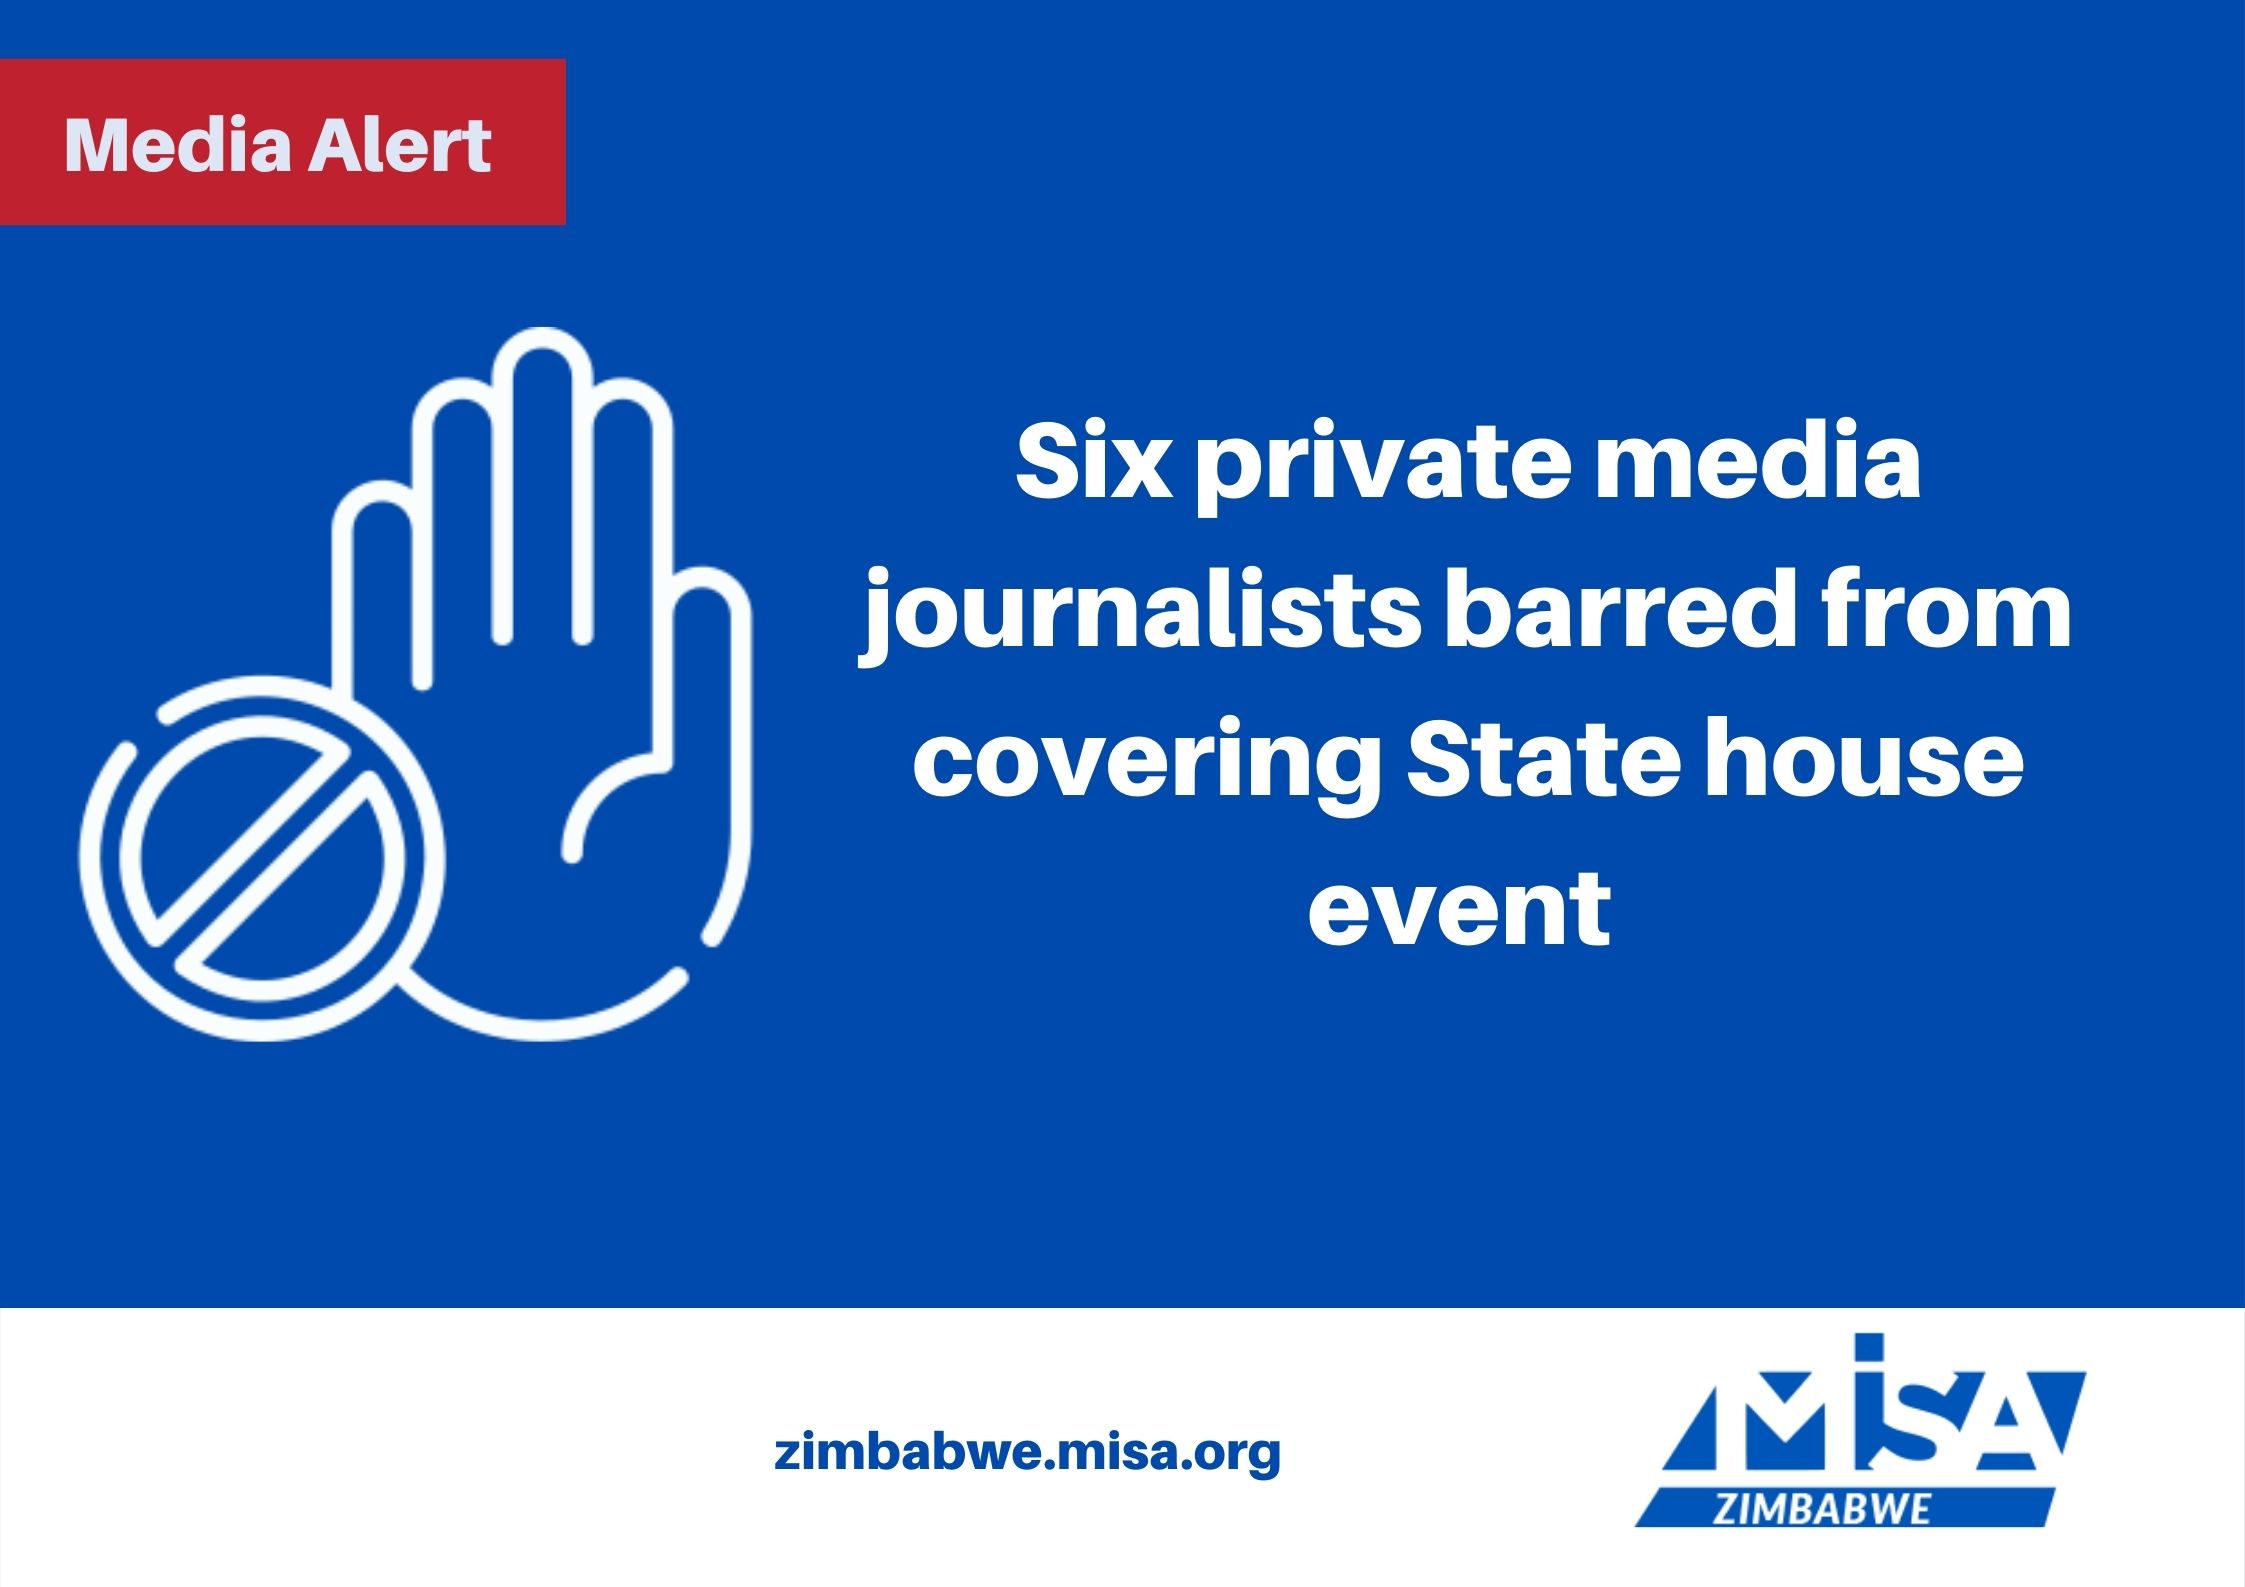 Six private media journalists barred from covering State house event